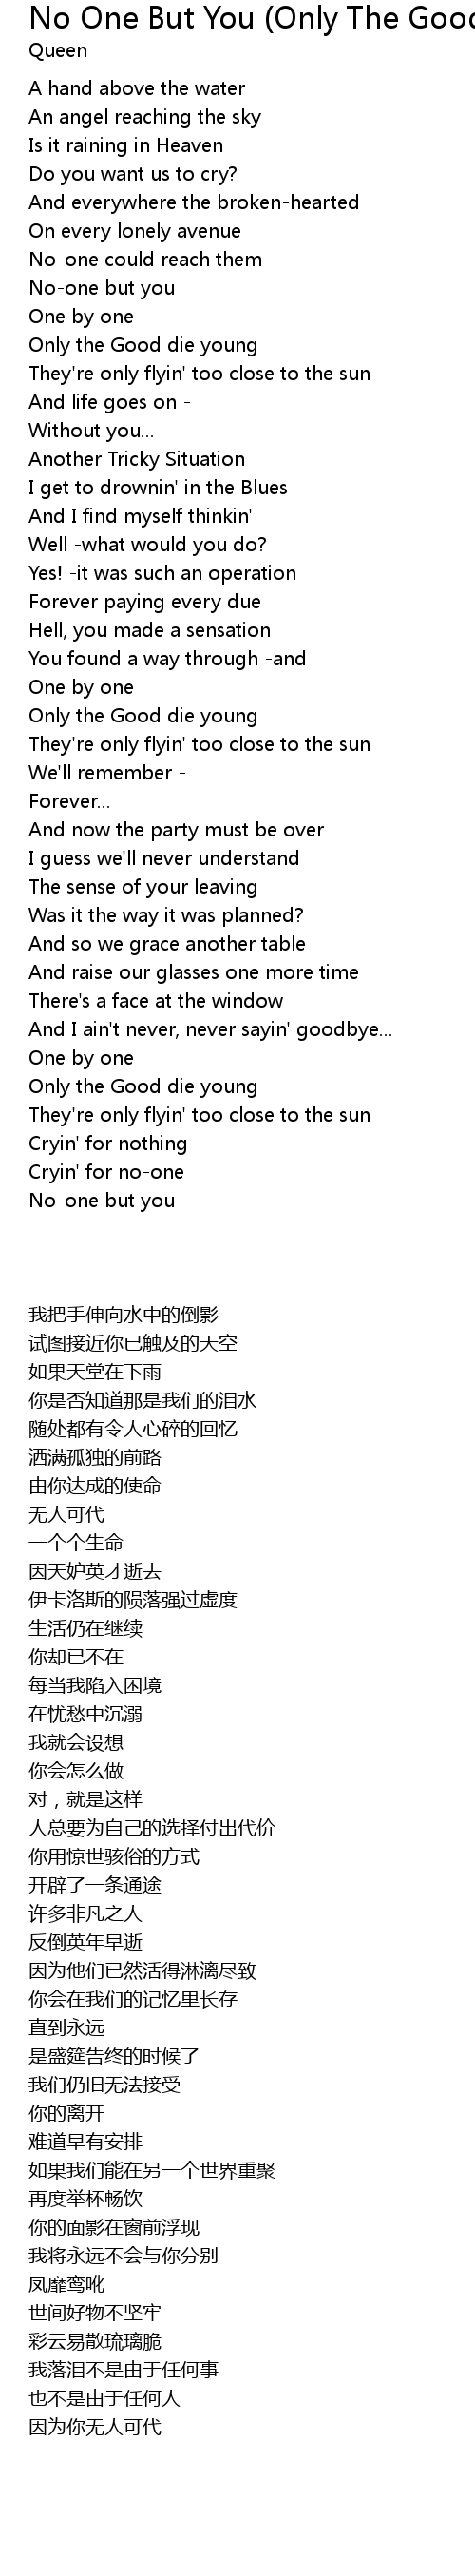 No One But You (Only The Good Die Young) Lyrics - Follow Lyrics